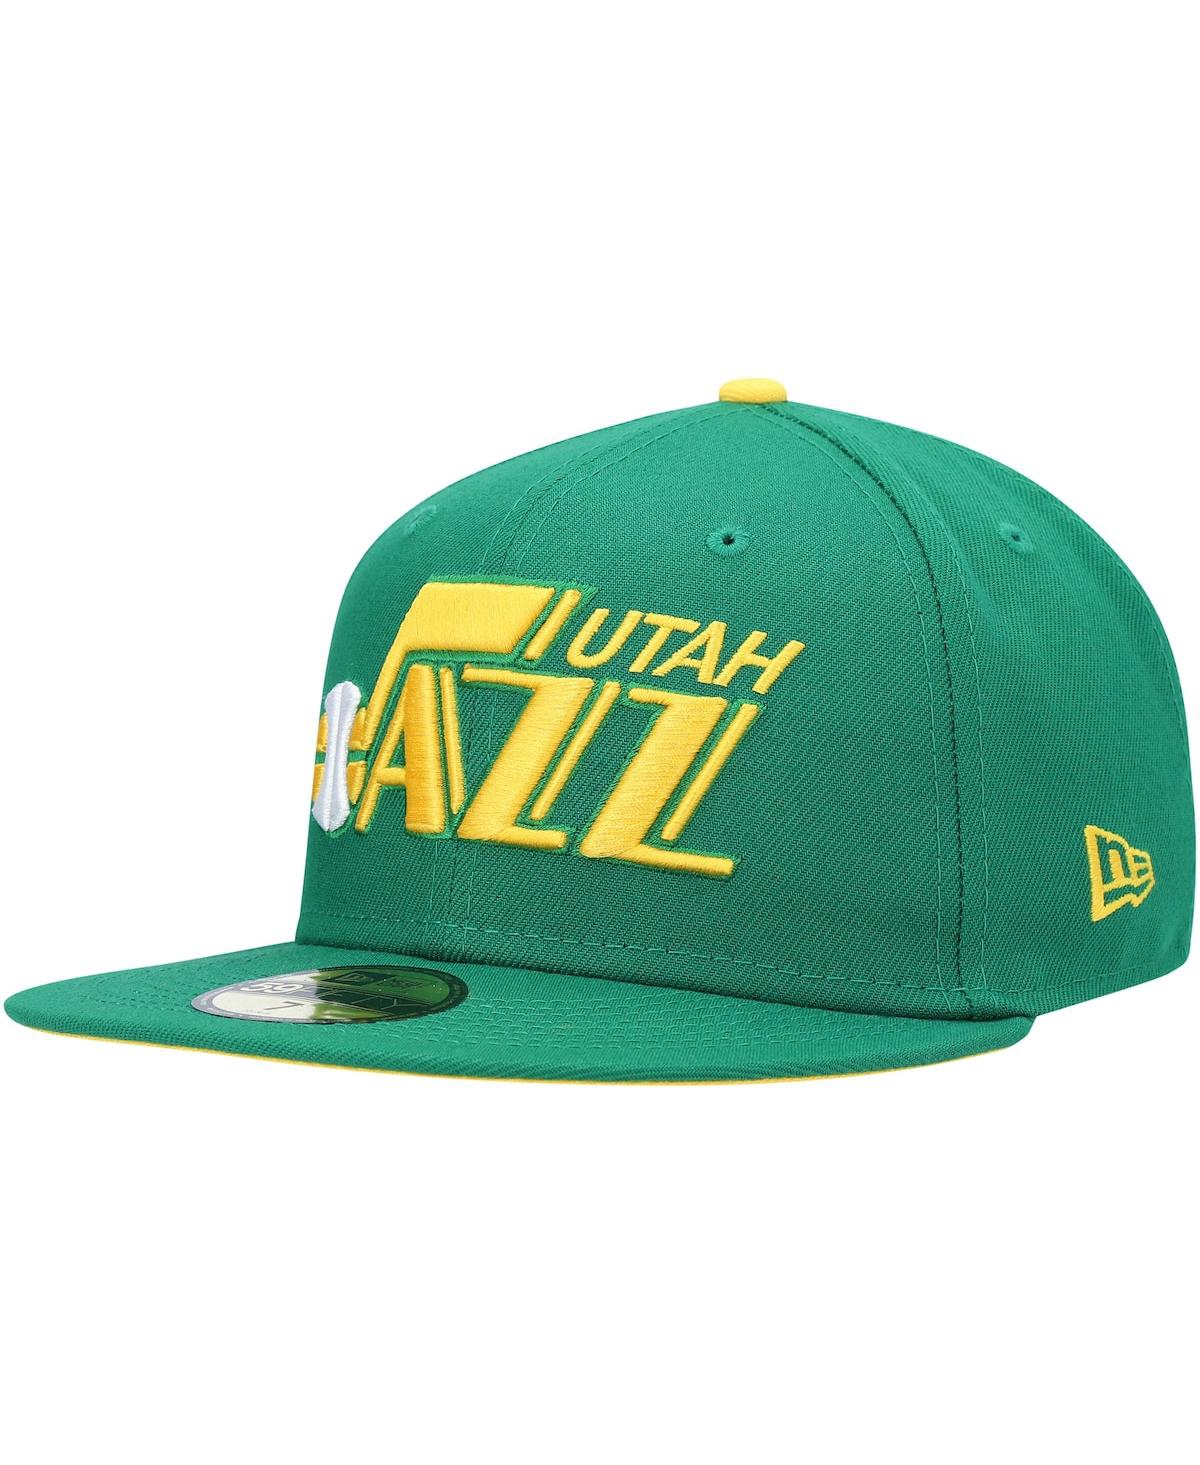 UPC 193647007713 product image for Men's Green Utah Jazz Hardwood Classics 59FIFTY Fitted Hat | upcitemdb.com